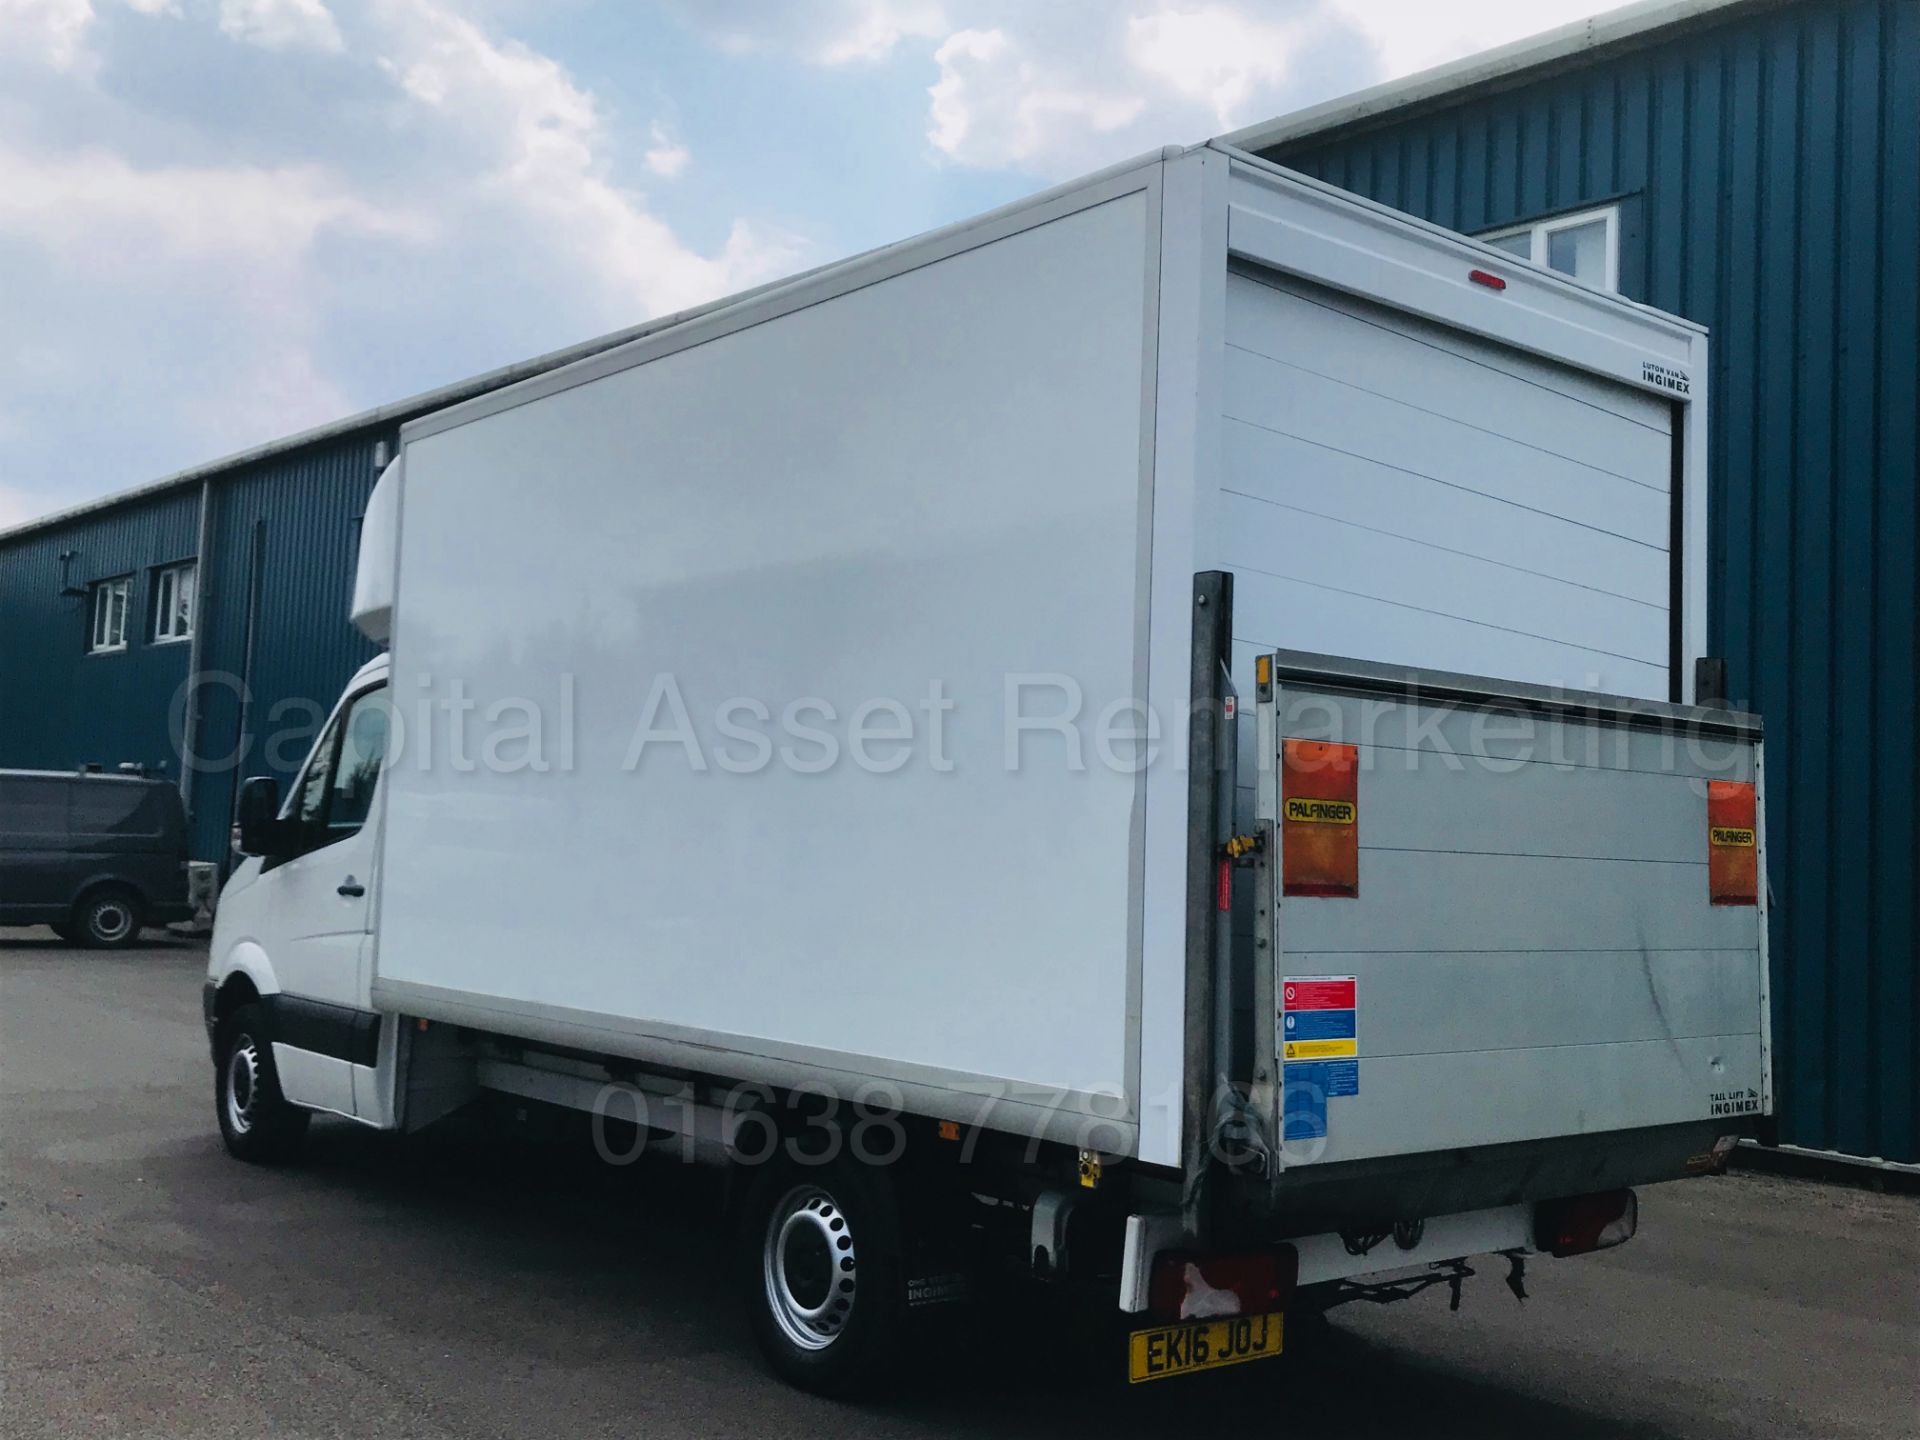 (On Sale) VOLKSWAGEN CRAFTER CR35 'LWB - LUTON' (2016) '2.0 TDI - 136 BHP - 6 SPEED' **TAIL-LIFT** - Image 5 of 36